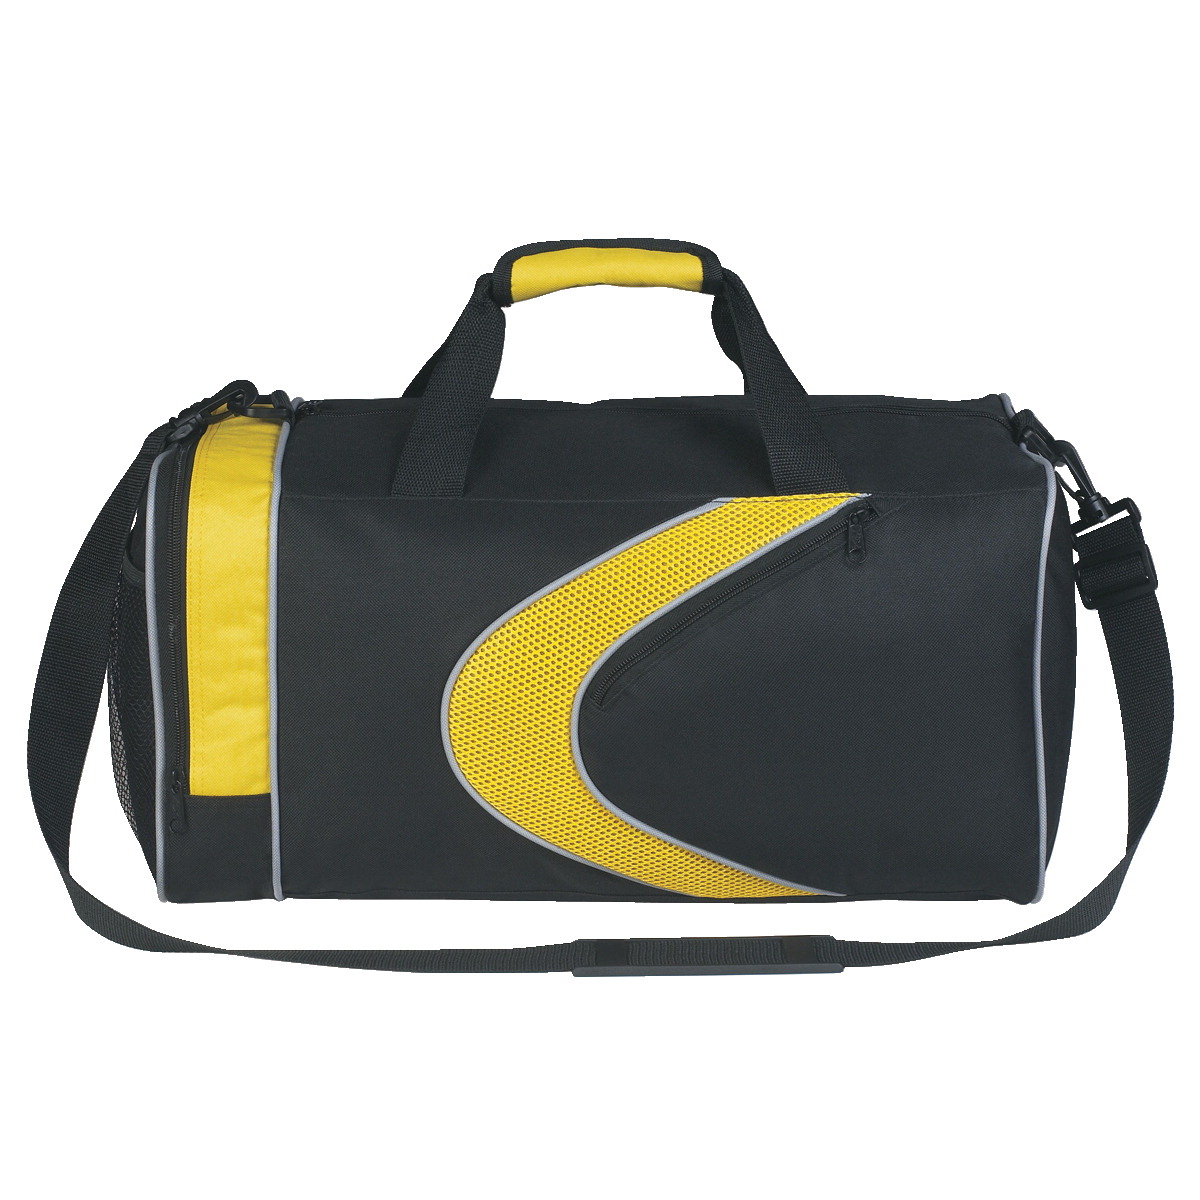 Sports Duffle Bag, 19 X 10 In. - Black With Yellow